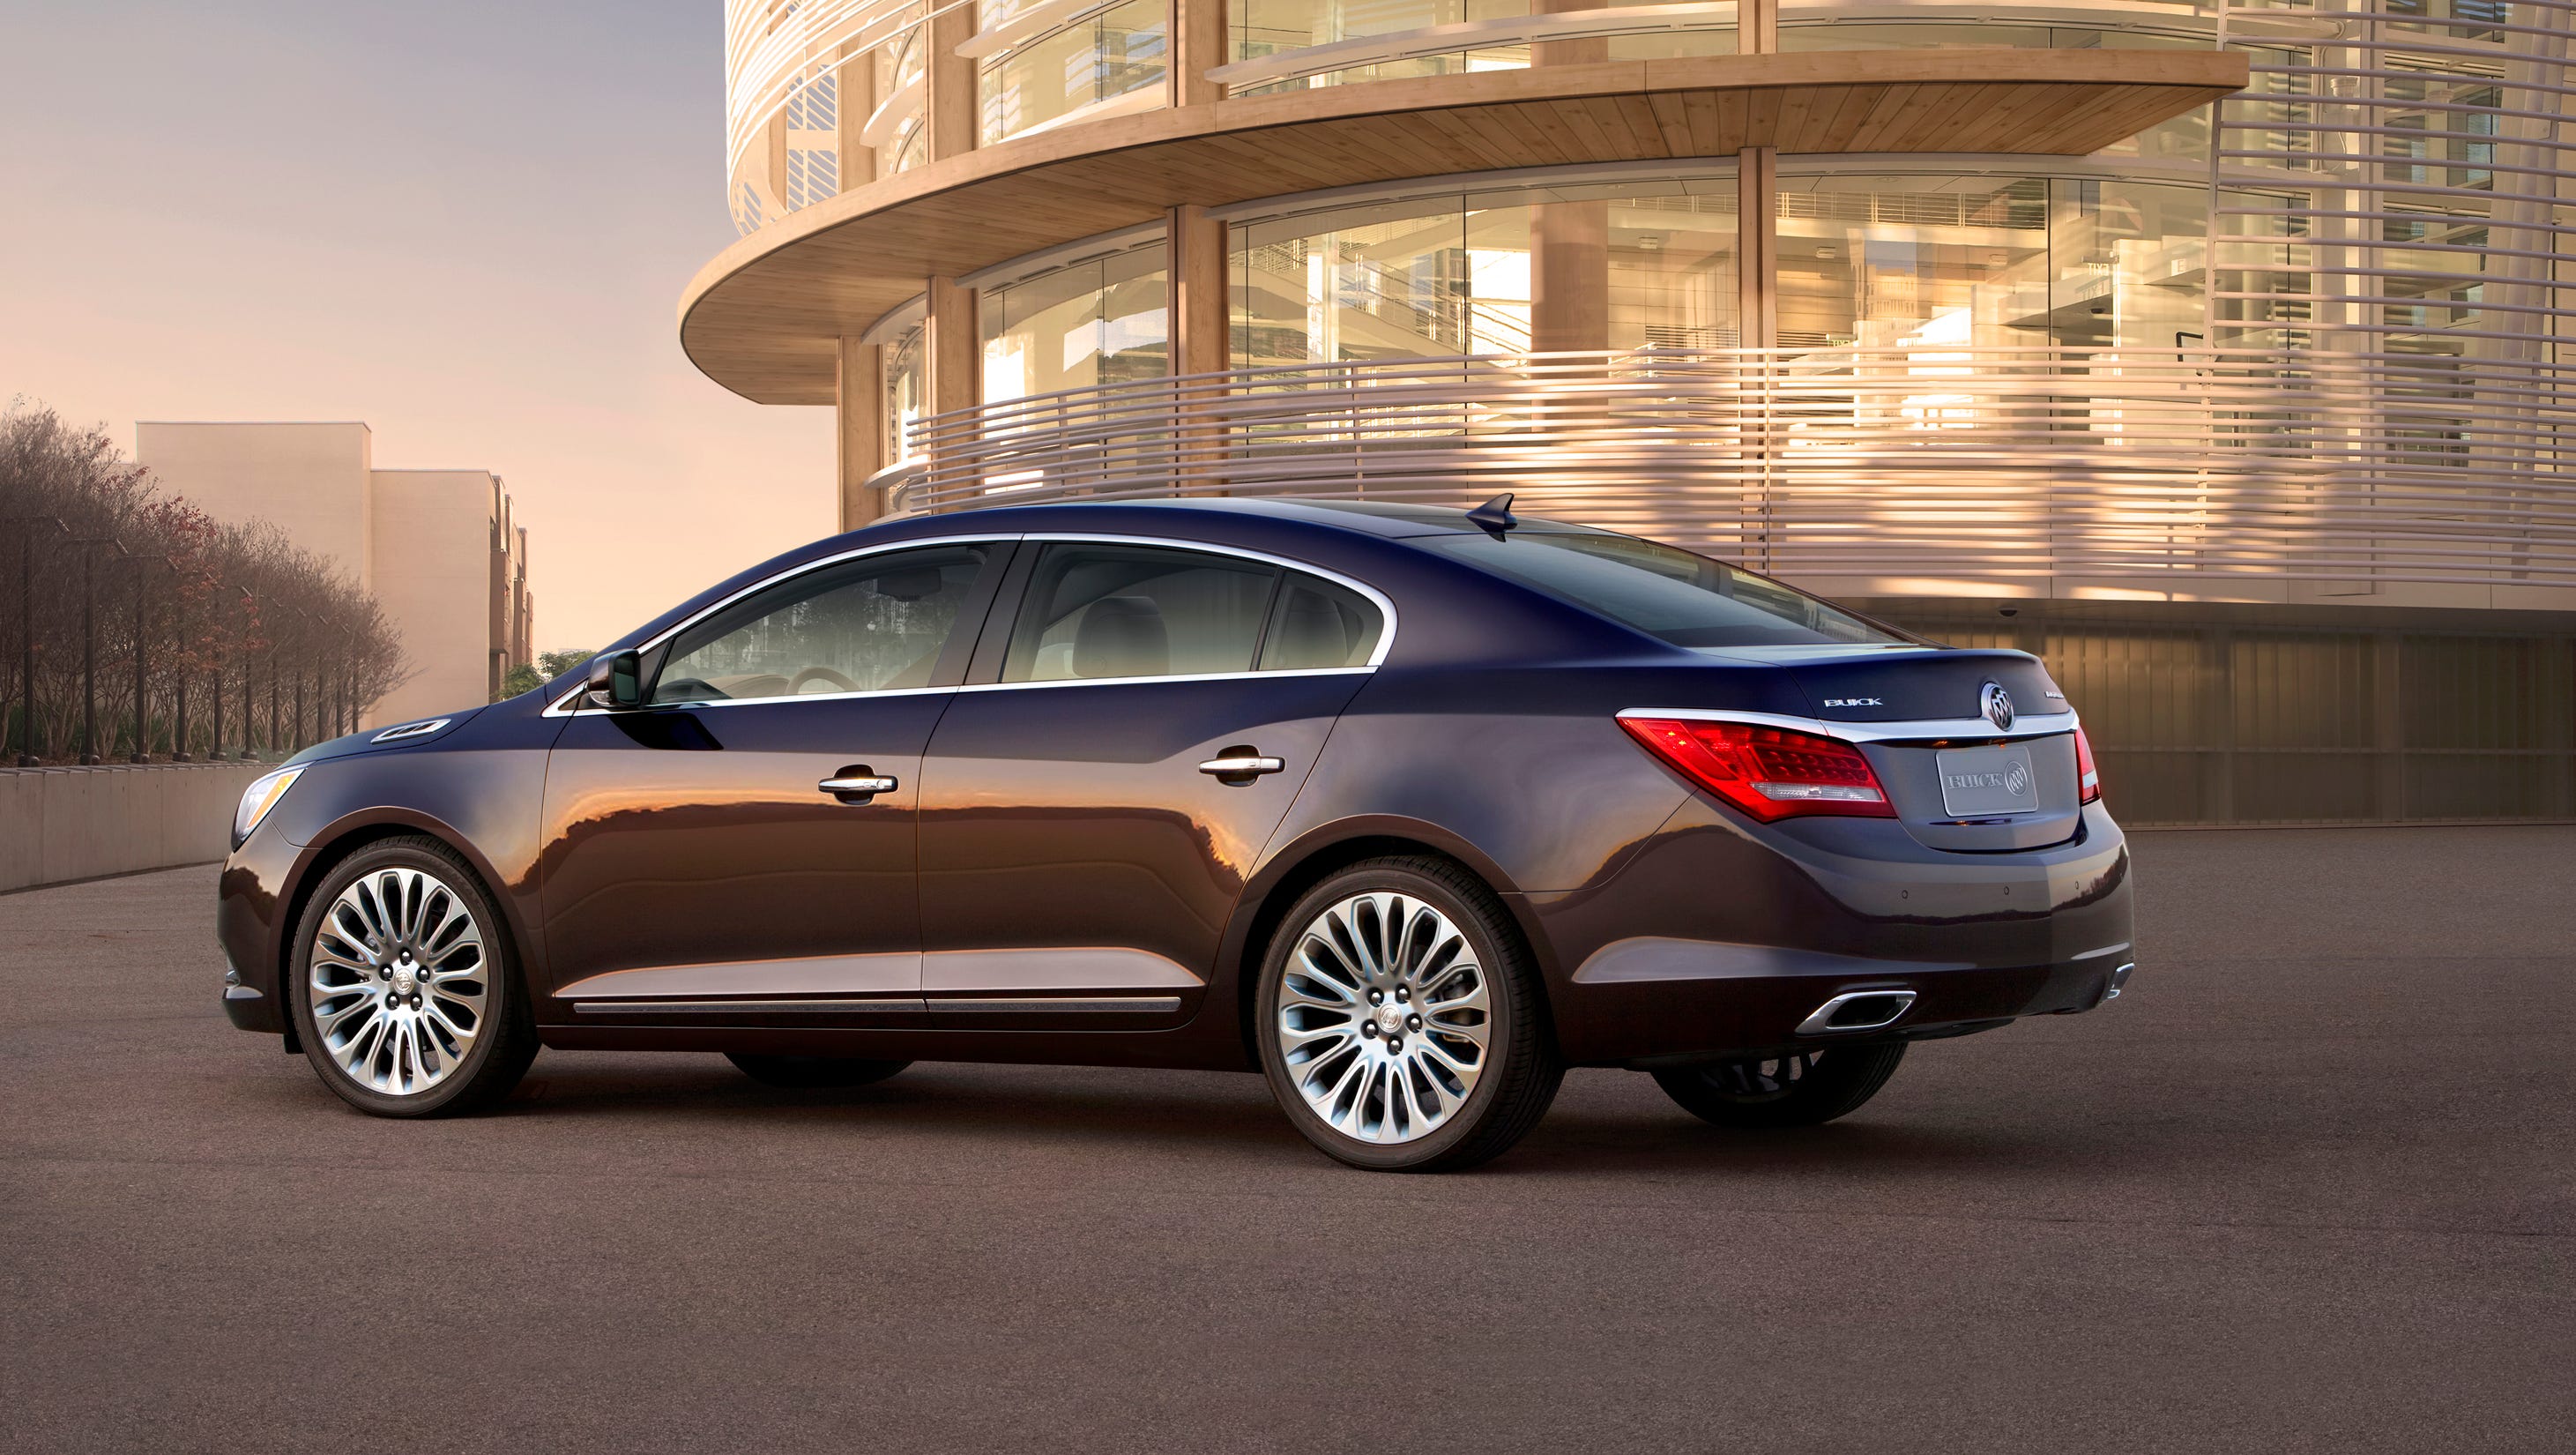 Auto review: 2014 Buick LaCrosse soaks up shades of sangria